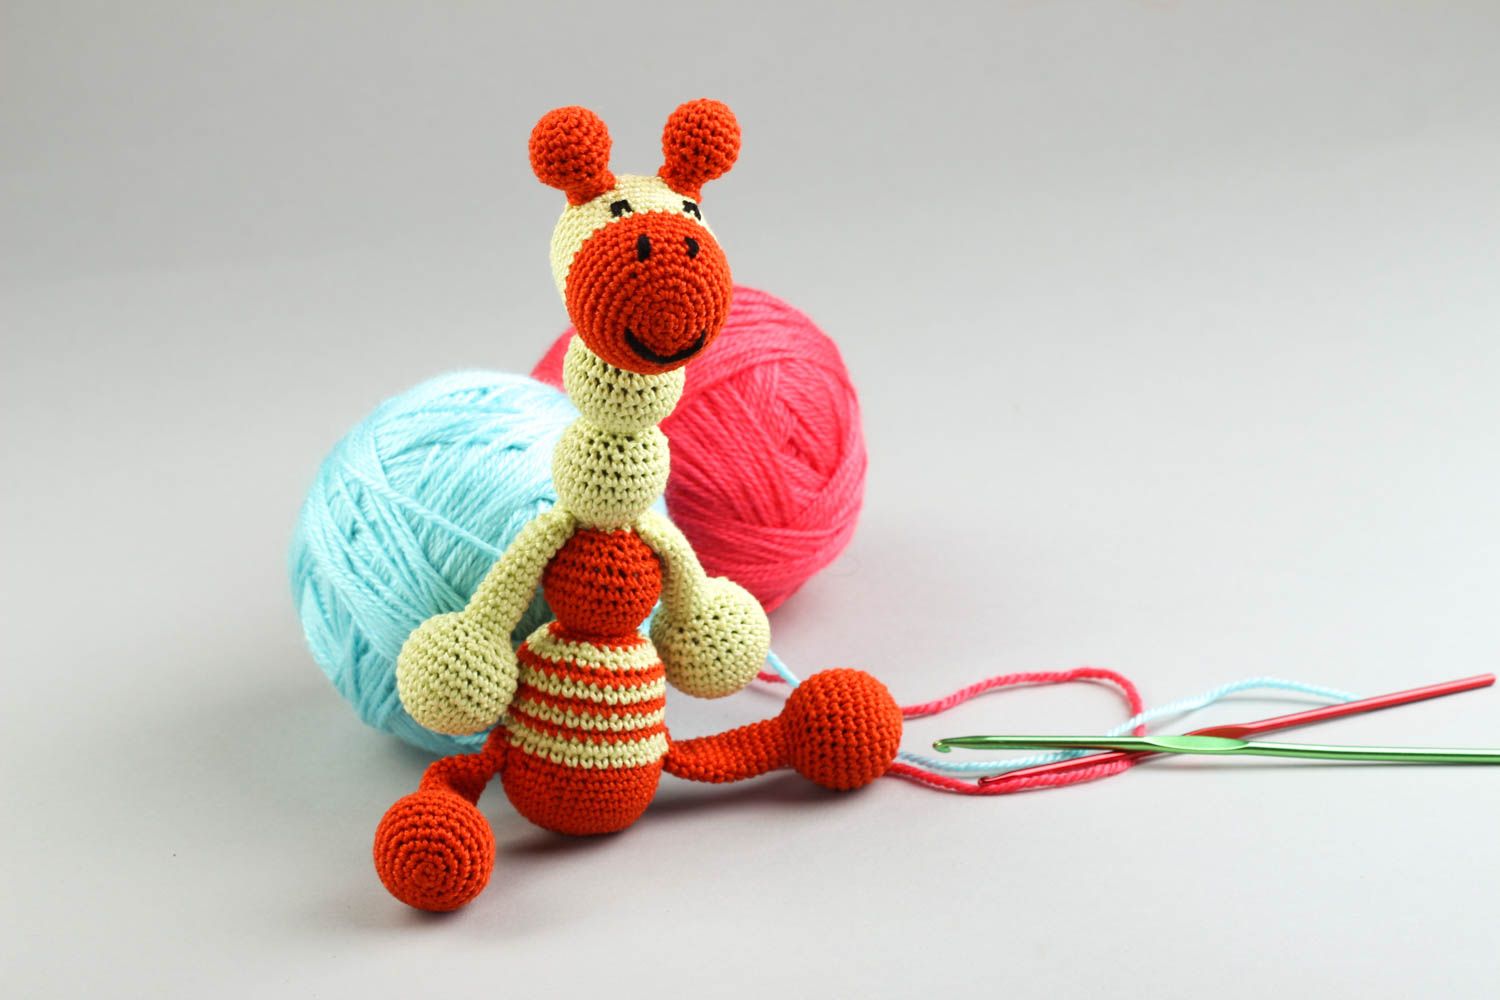 Handmade rattle crocheted soft toys for babies toy or new born babies photo 1